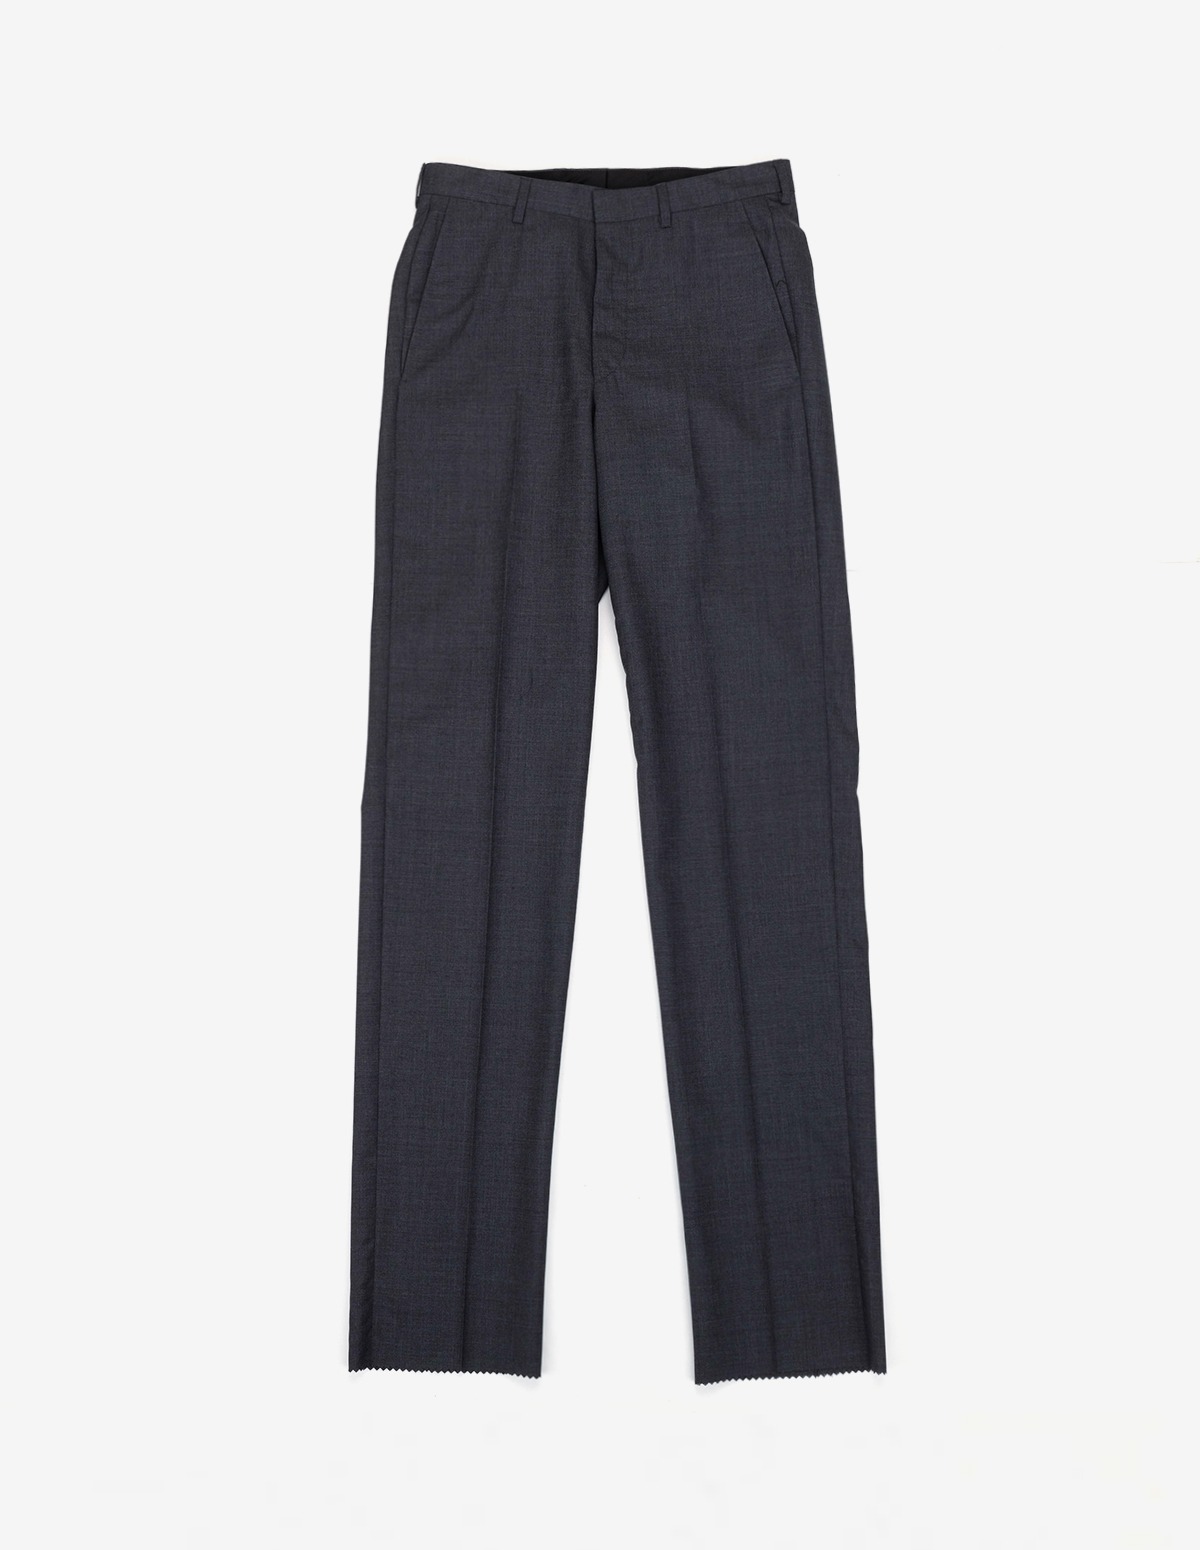 Wool Trousers (Charcoal)